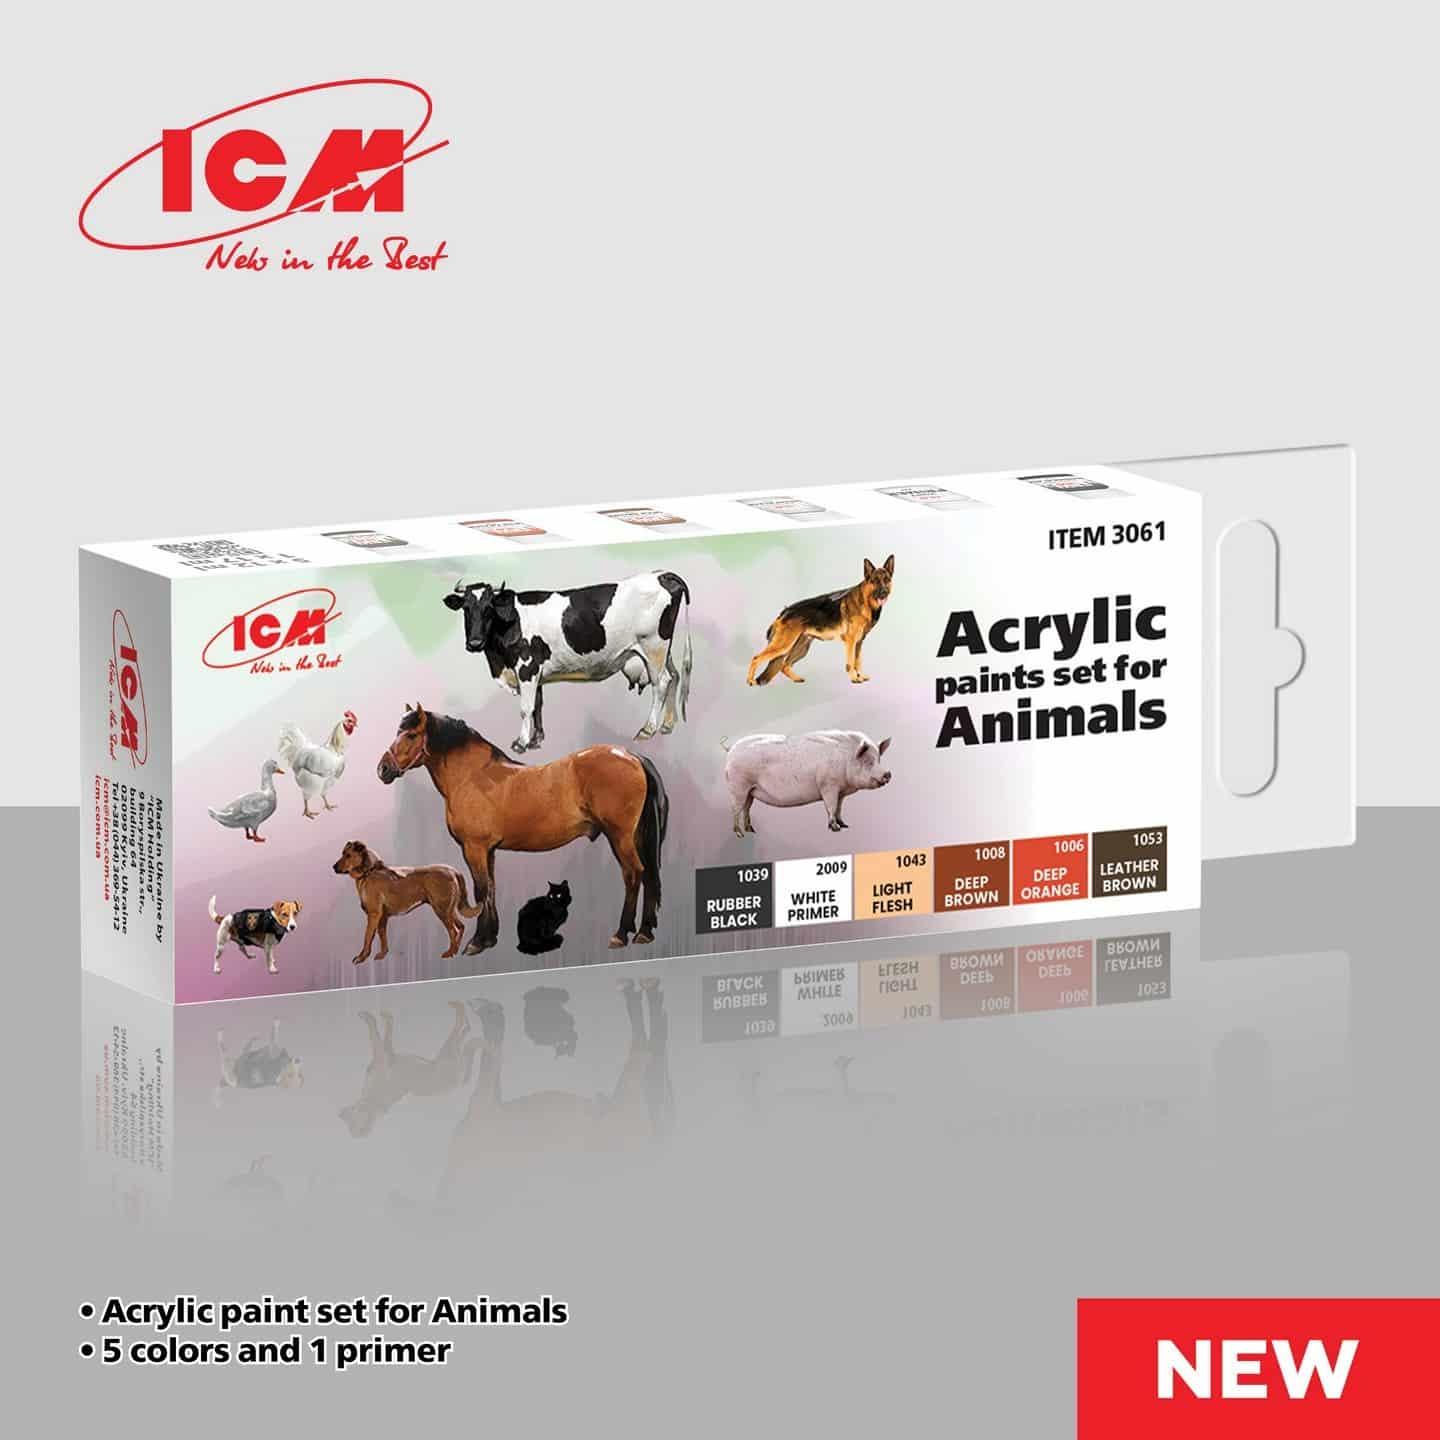 SOON ON SALE! Acrylic paints set for Animals